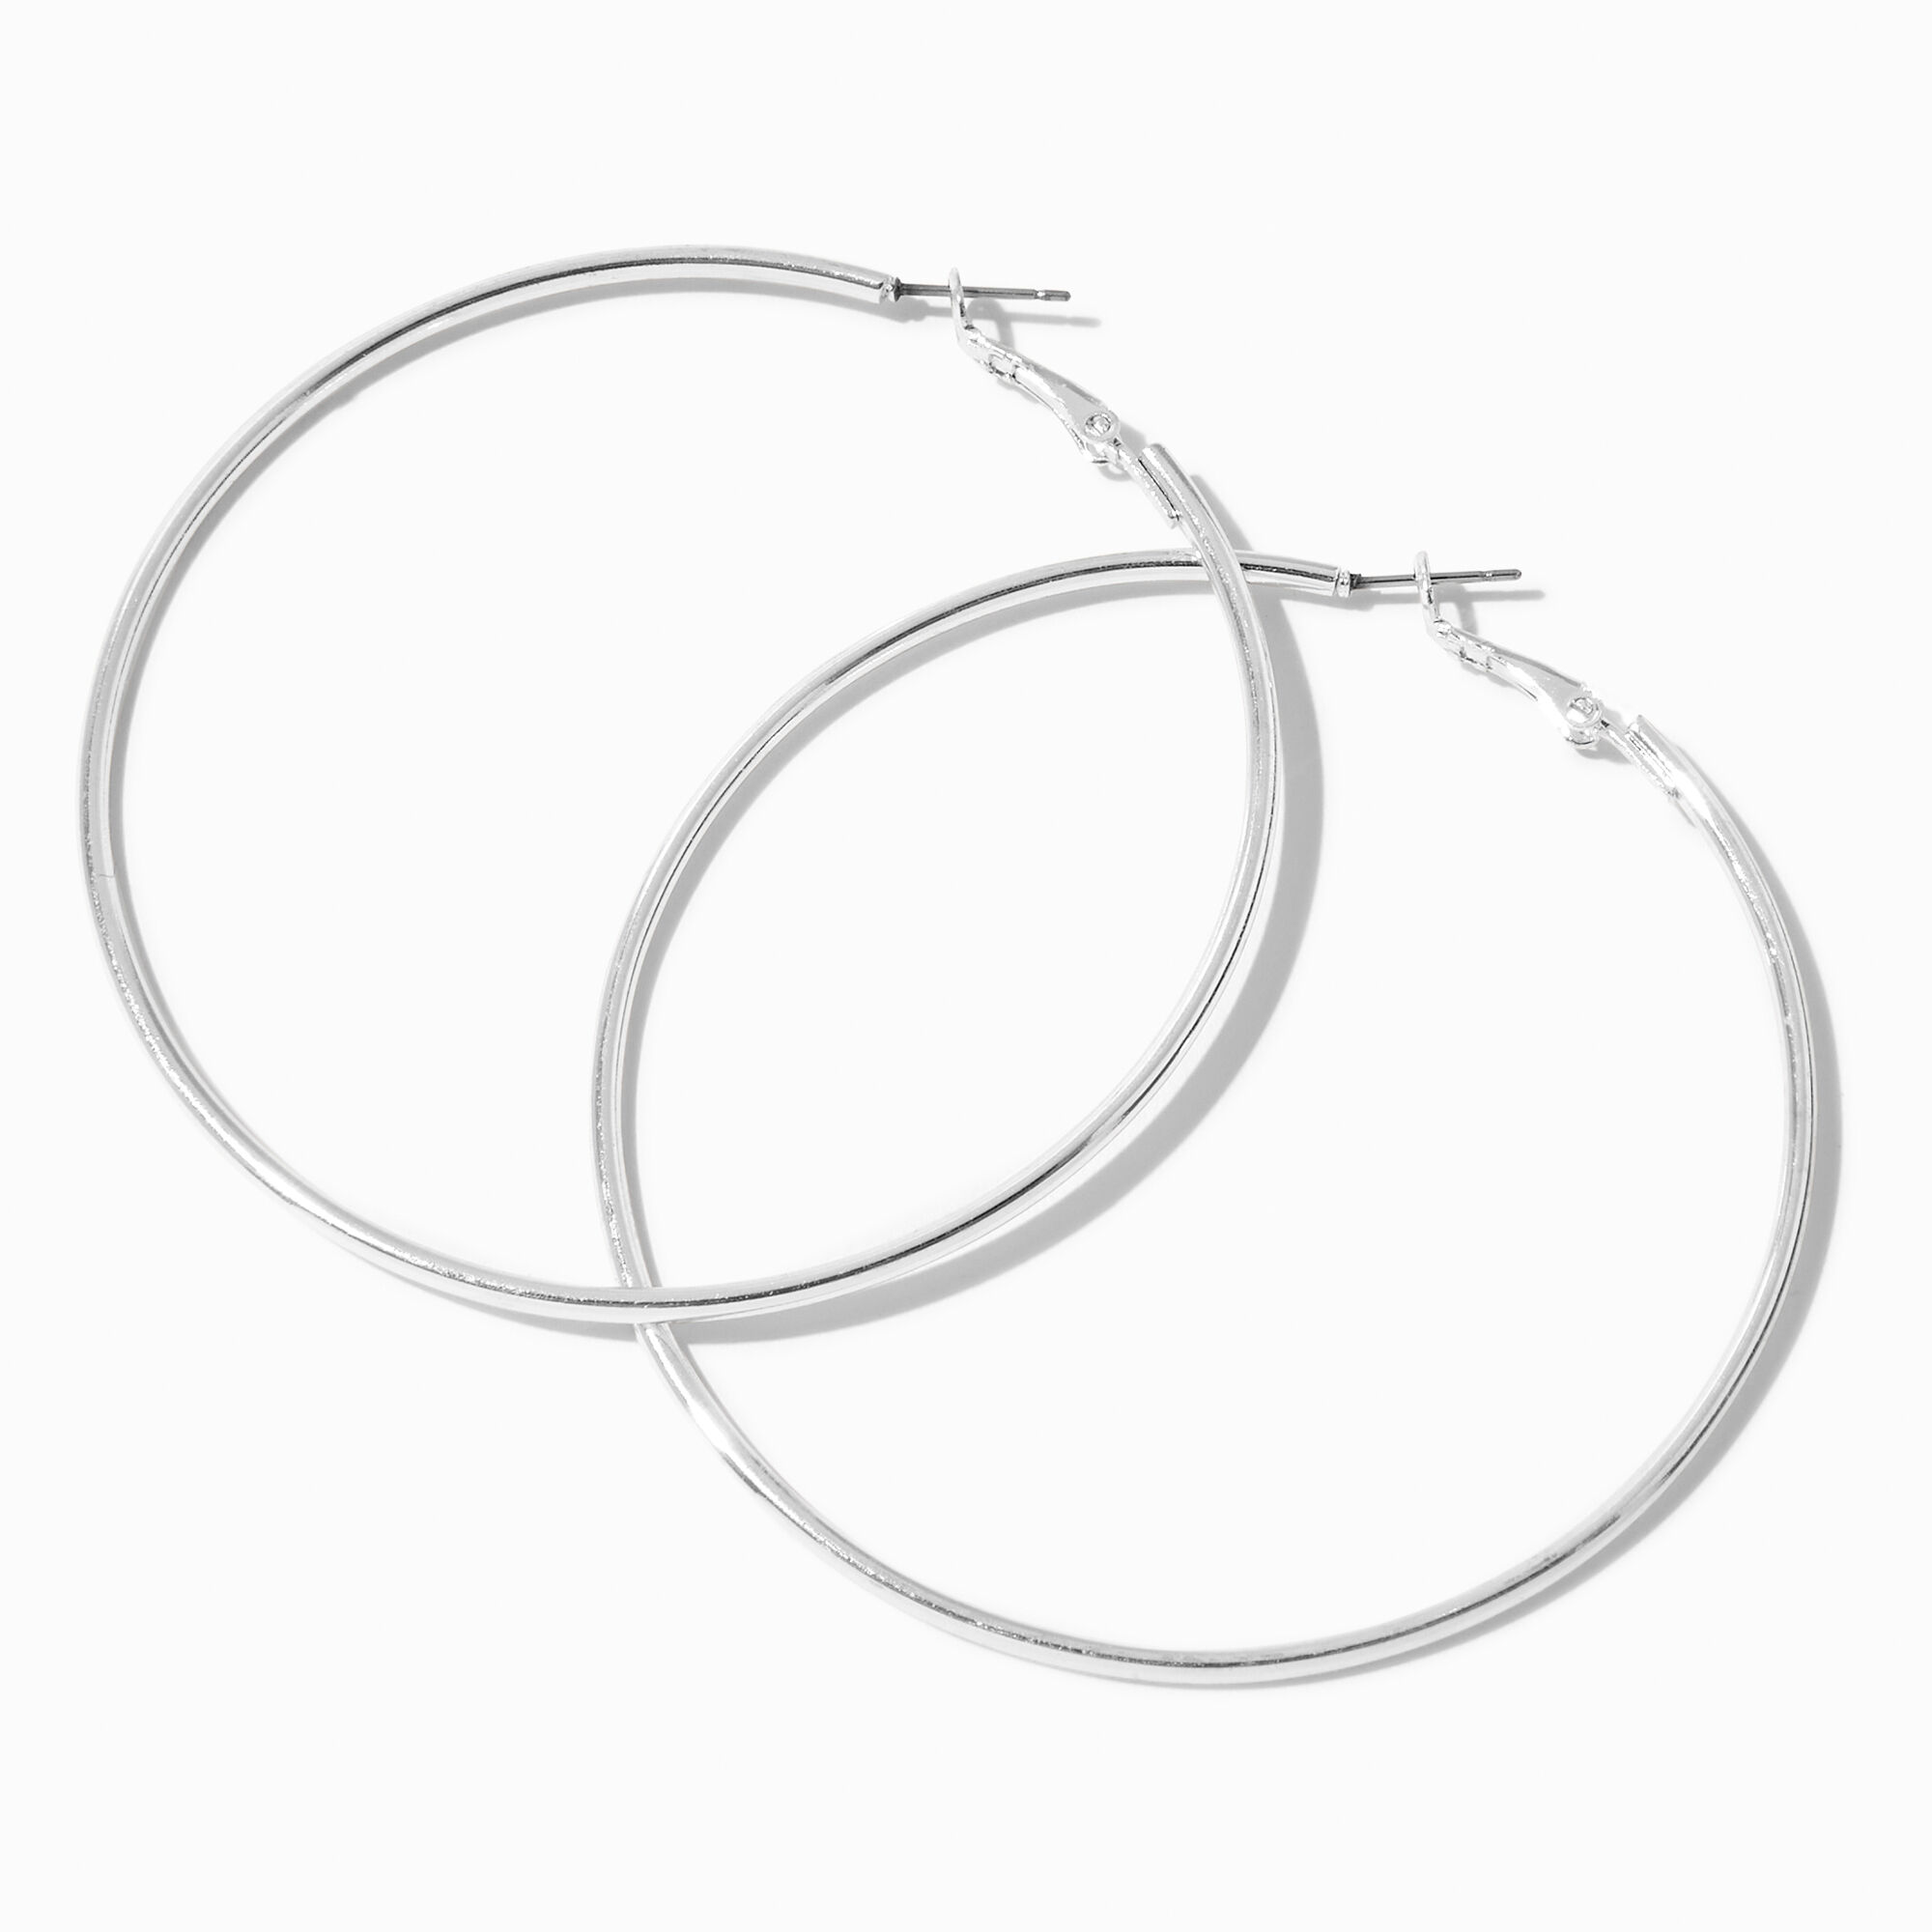 View Claires Tone 70MM Hoop Earrings Silver information